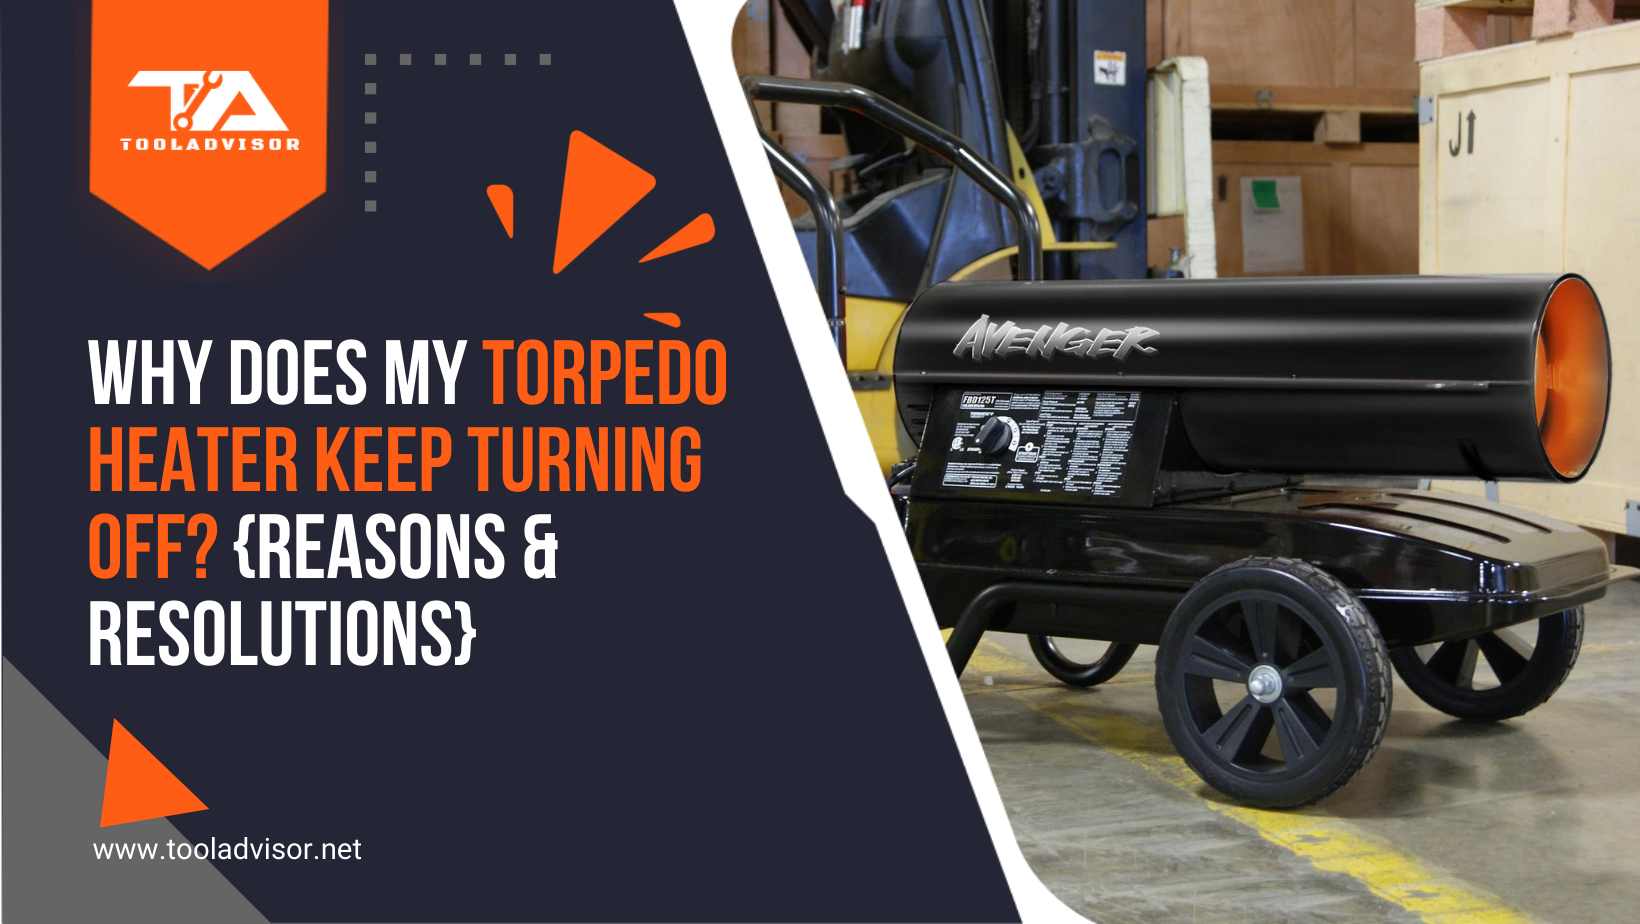 Why Does My Torpedo Heater Keep Turning Off? {Reasons & Resolutions}